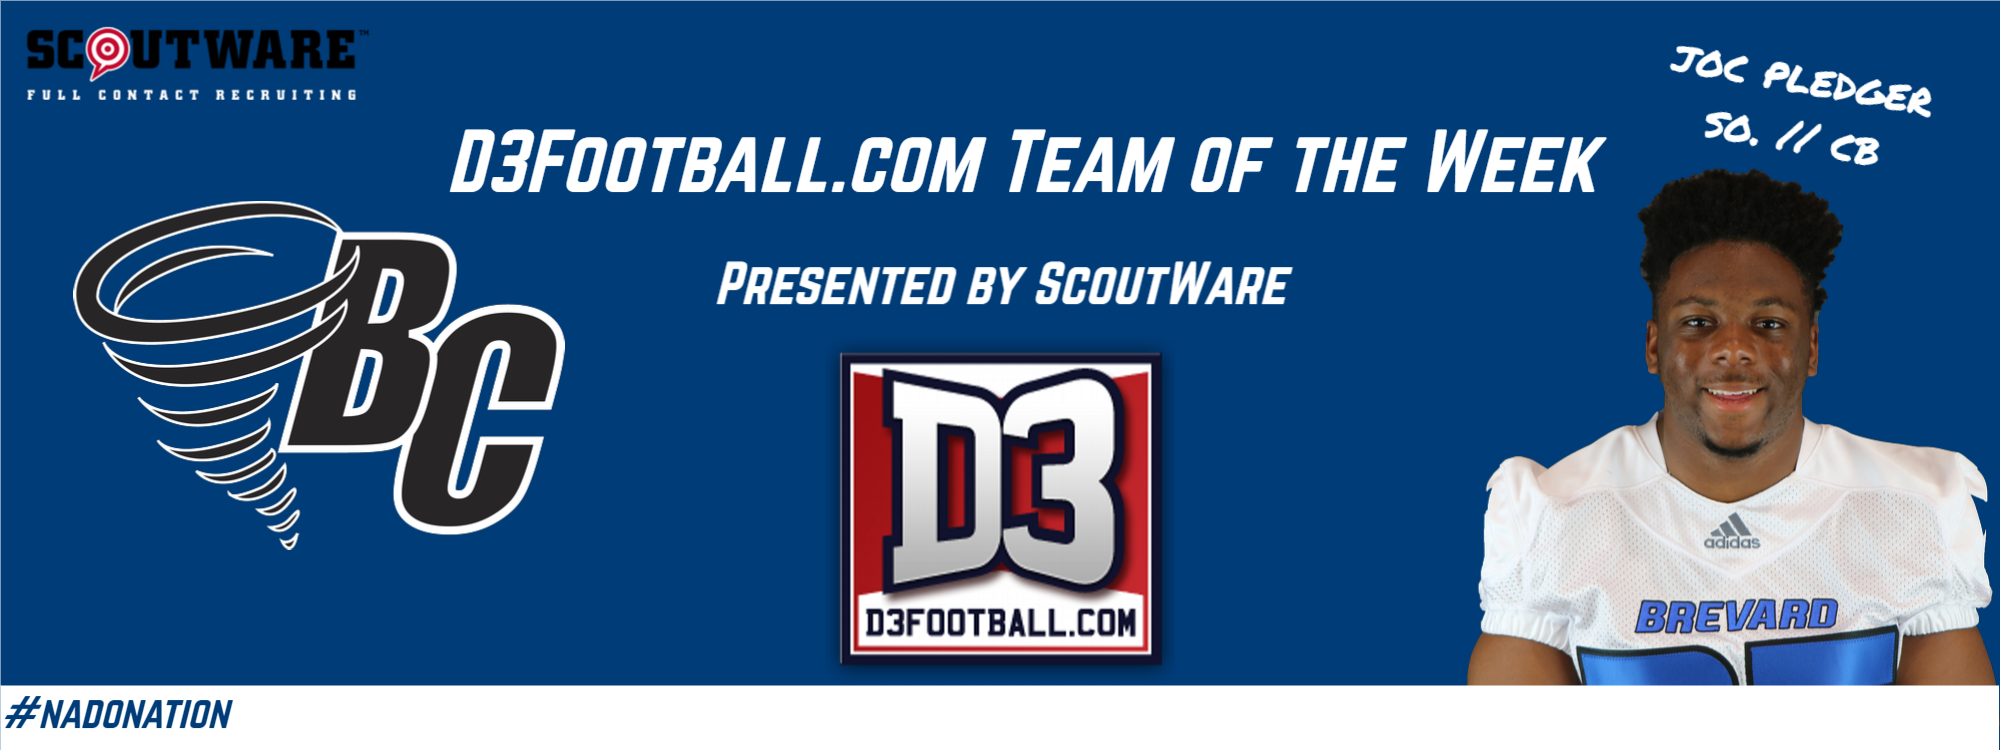 Pledger Honored by D3football.com, Selected to Team of the Week